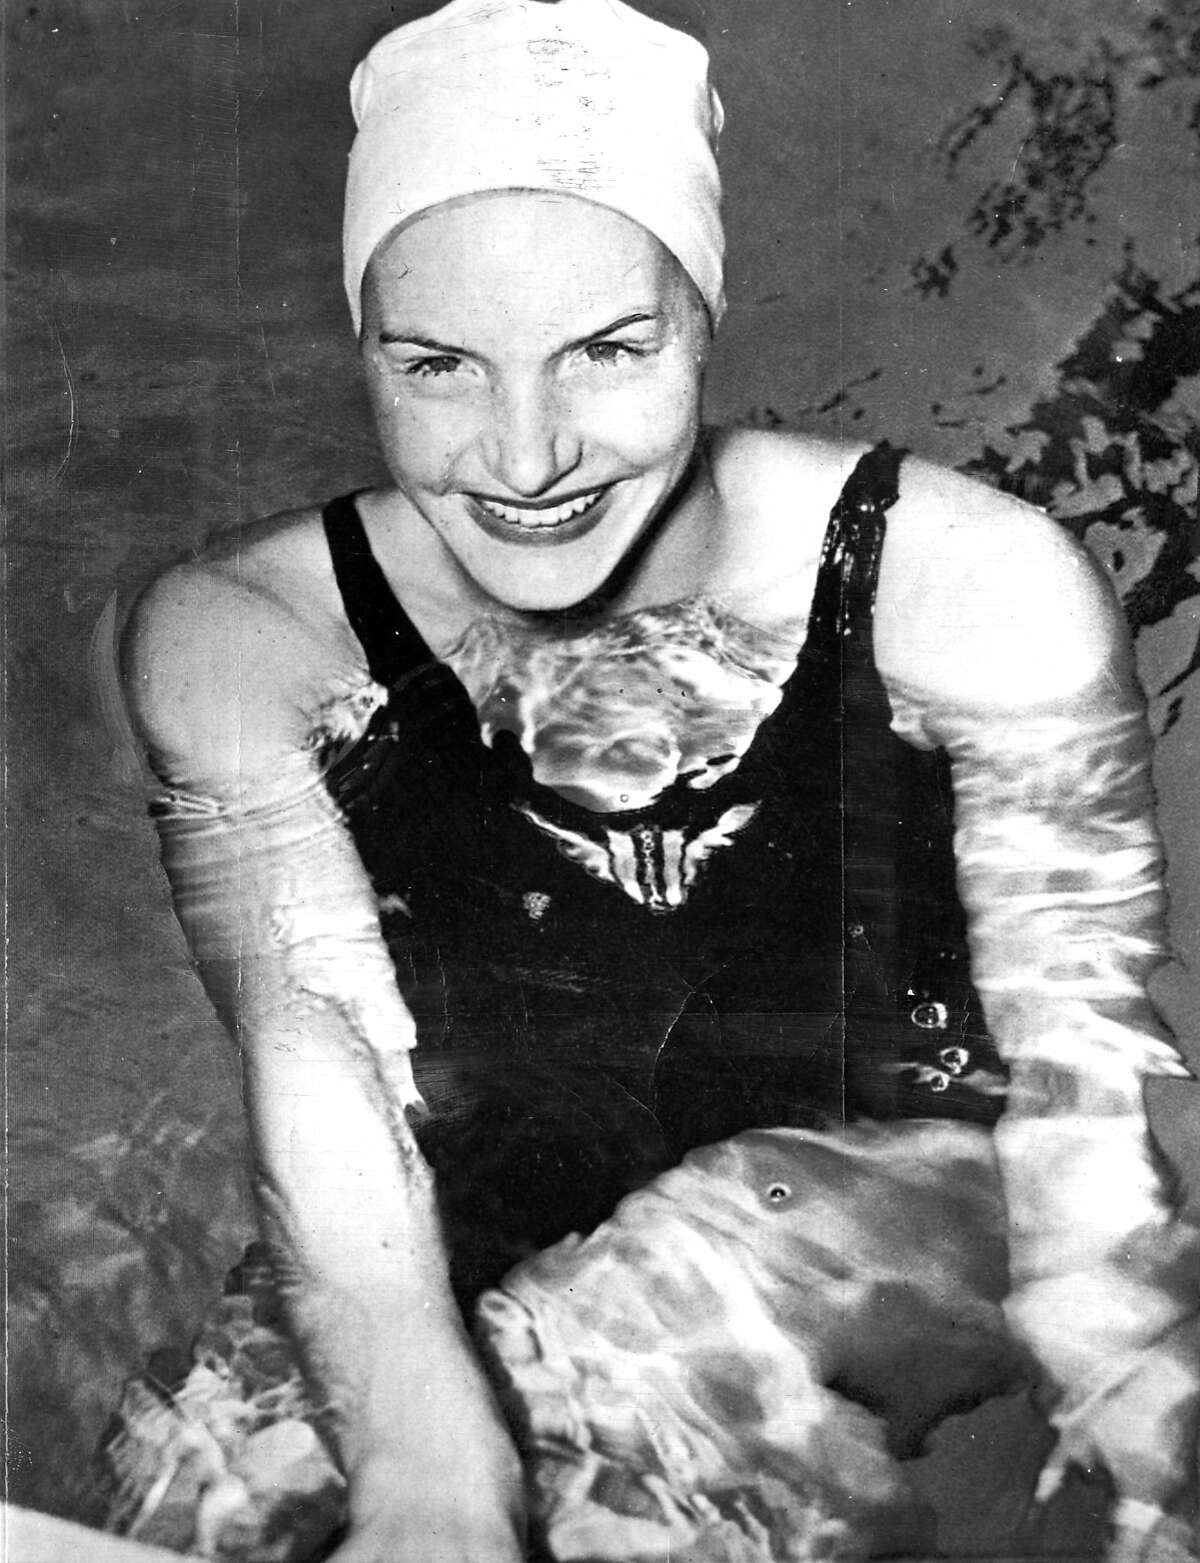 April 5, 1948: San Francisco swimmer Ann Curtis at the Crystal Plunge. Curtis won several medals at the 1948 Olympic Games.